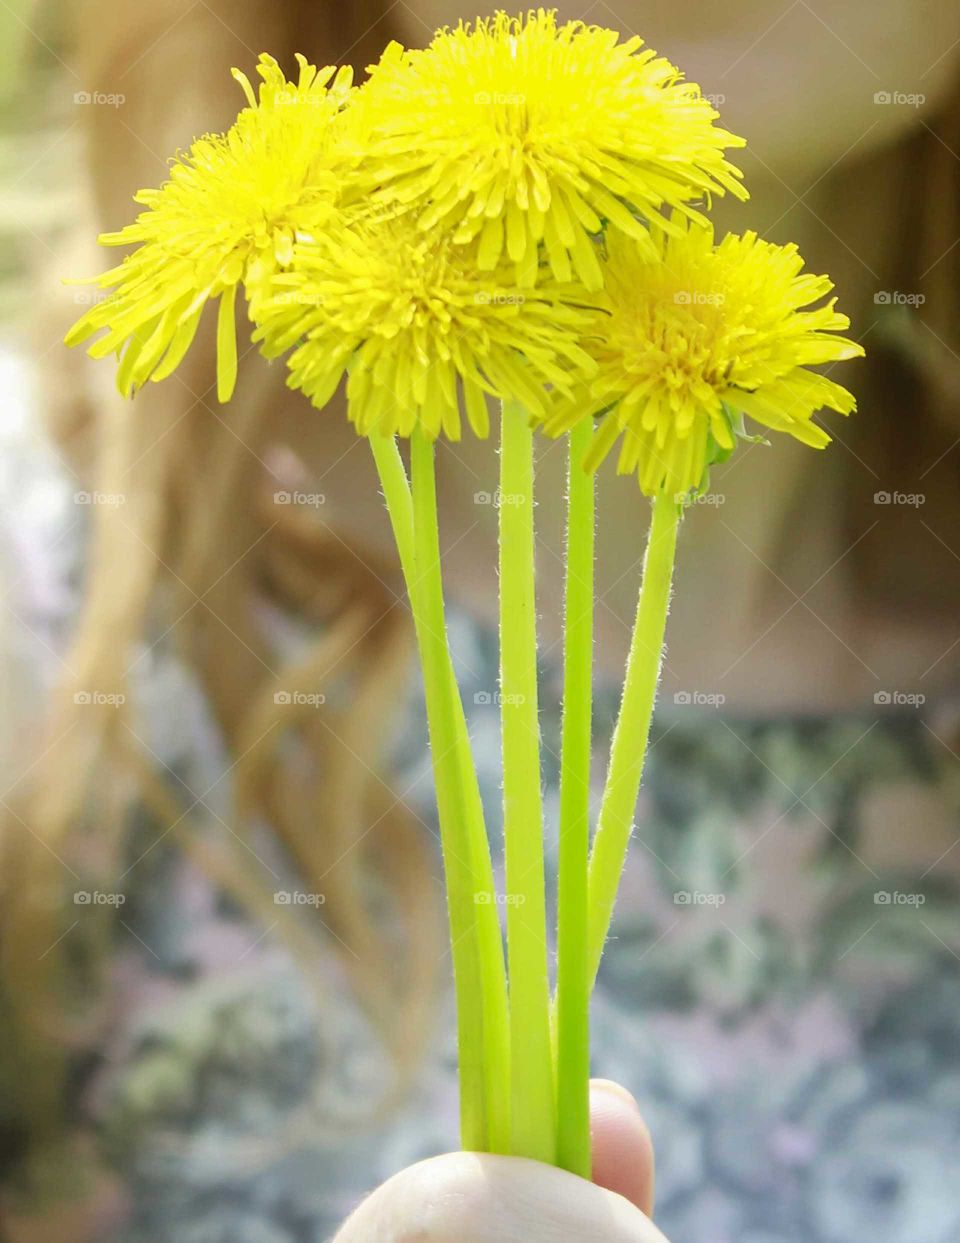 Dandelions in a hand of a girl